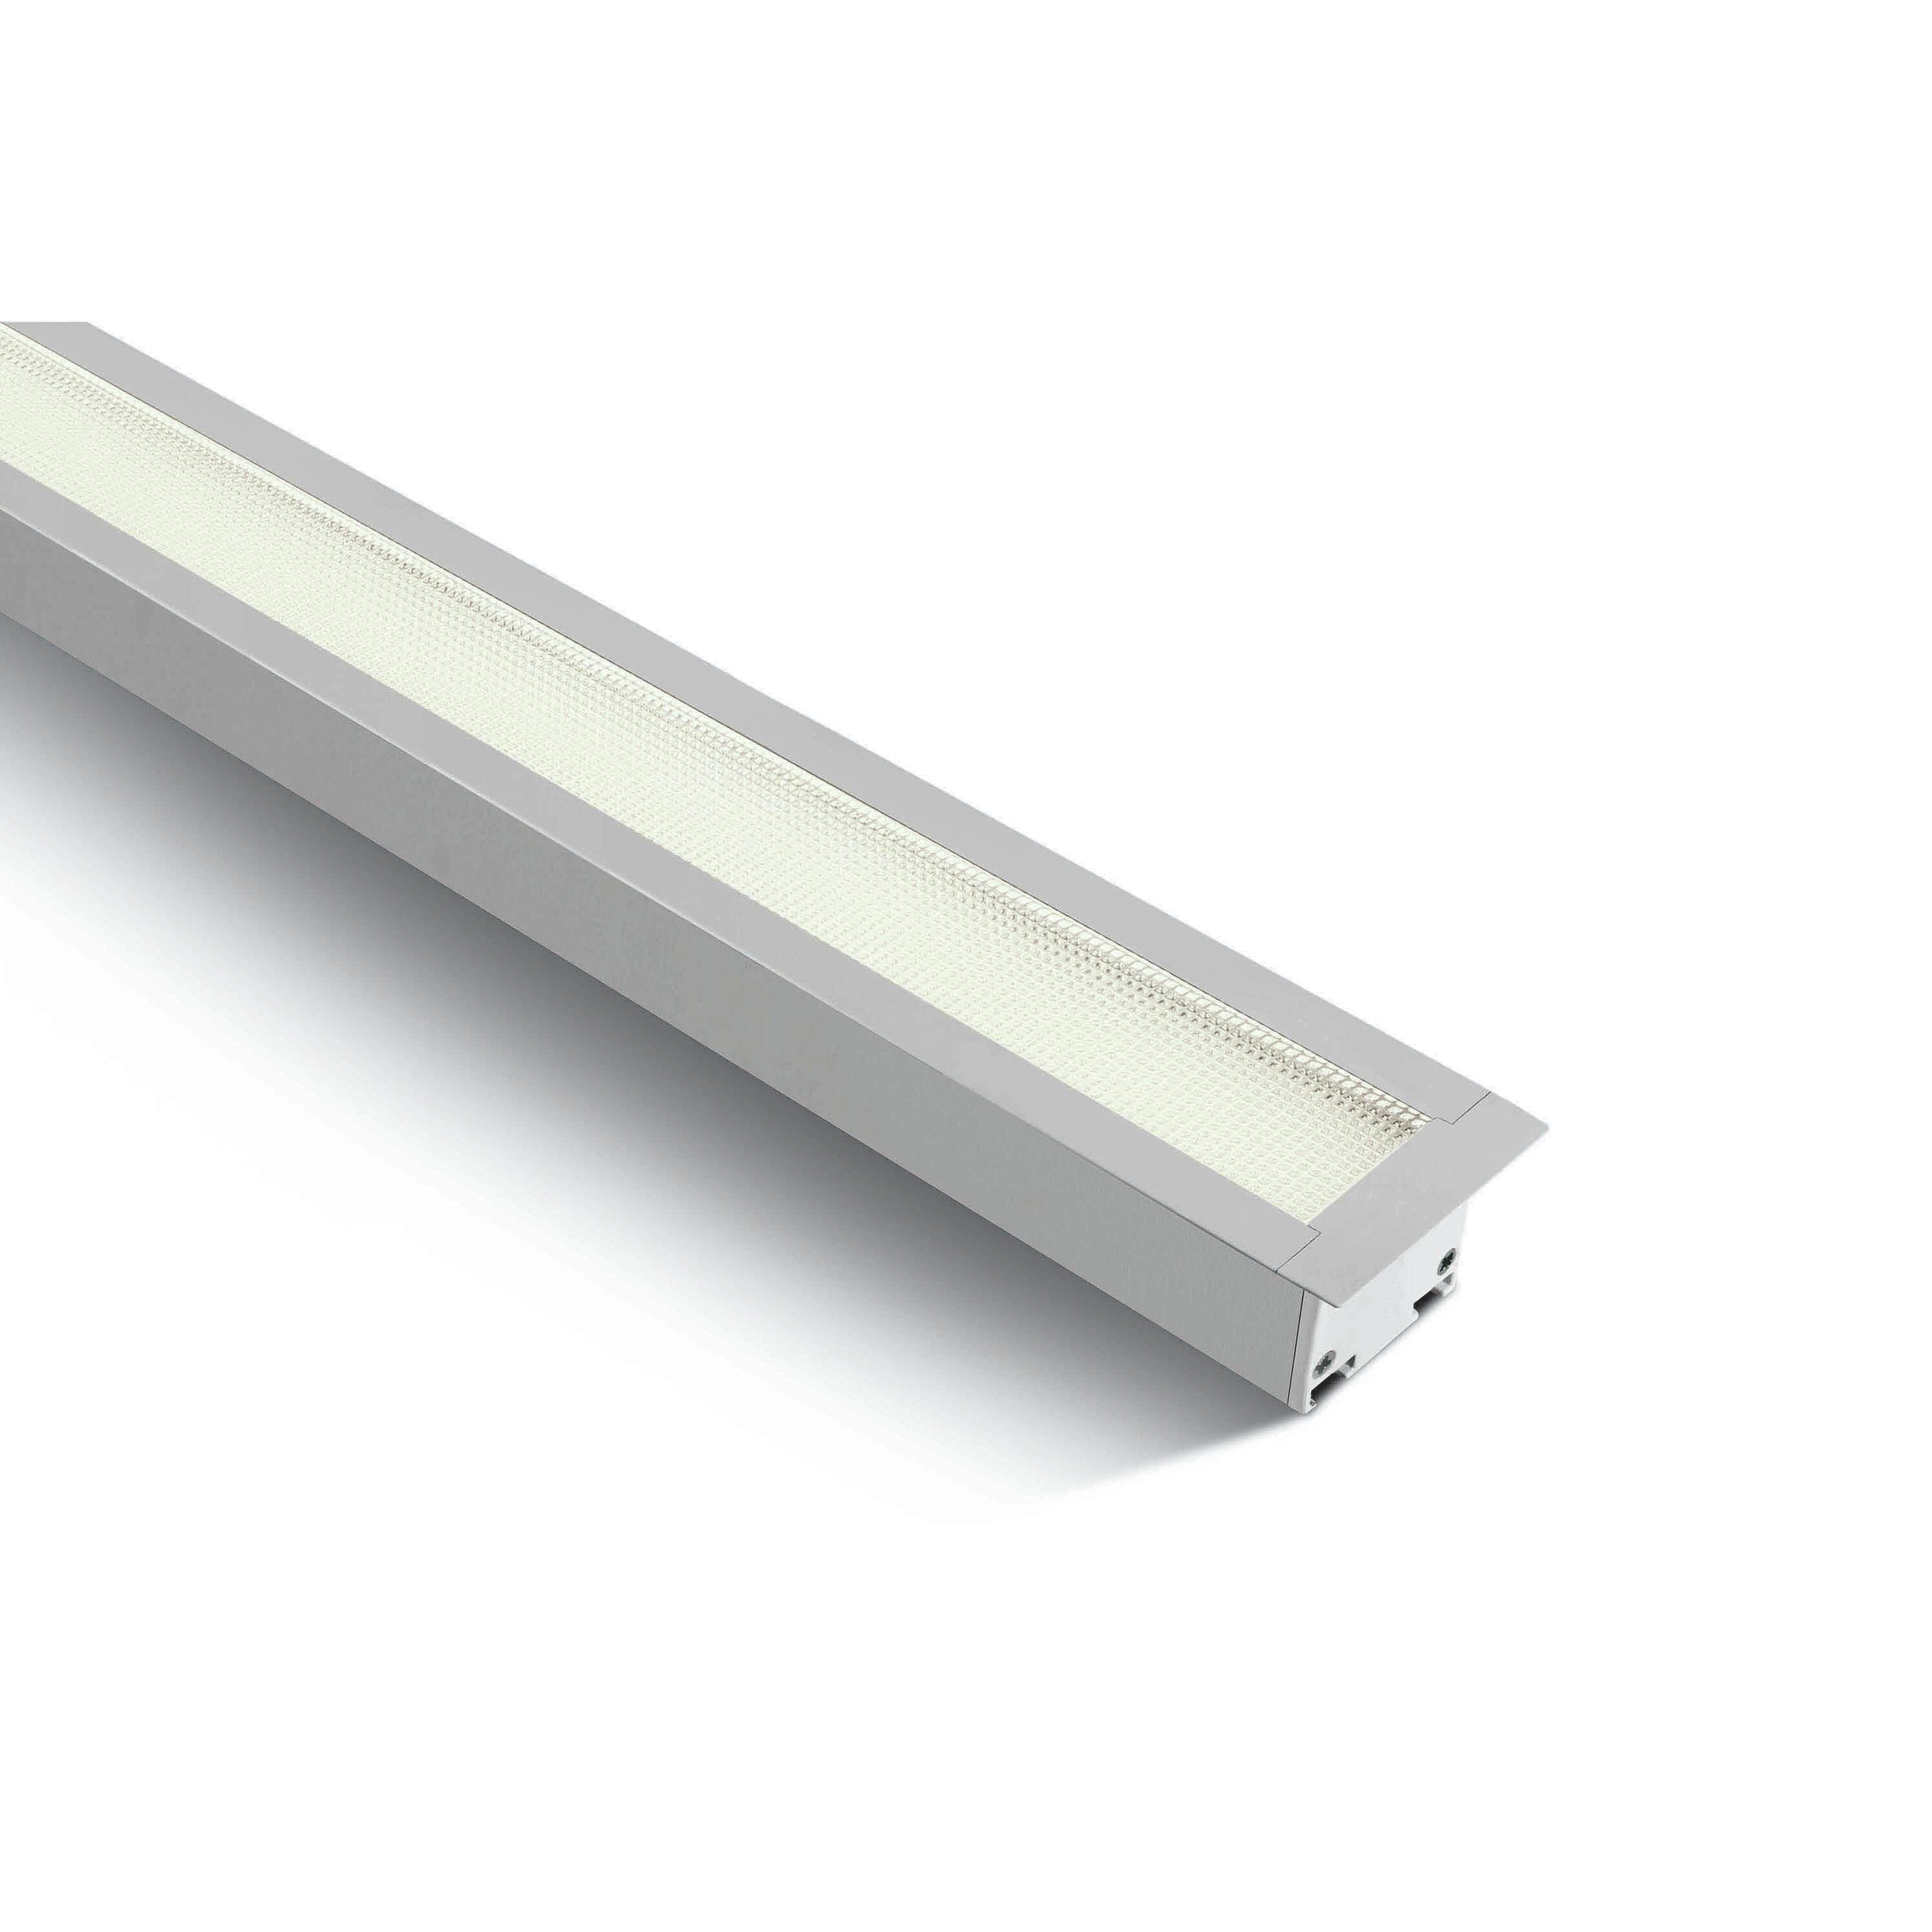 ONE Light UGR19 Recessed LED Linear Profiles plafondverlichting - 121 x 5 cm - 40W LED incl. - wit - witte lichtkleur | Lichtkoning